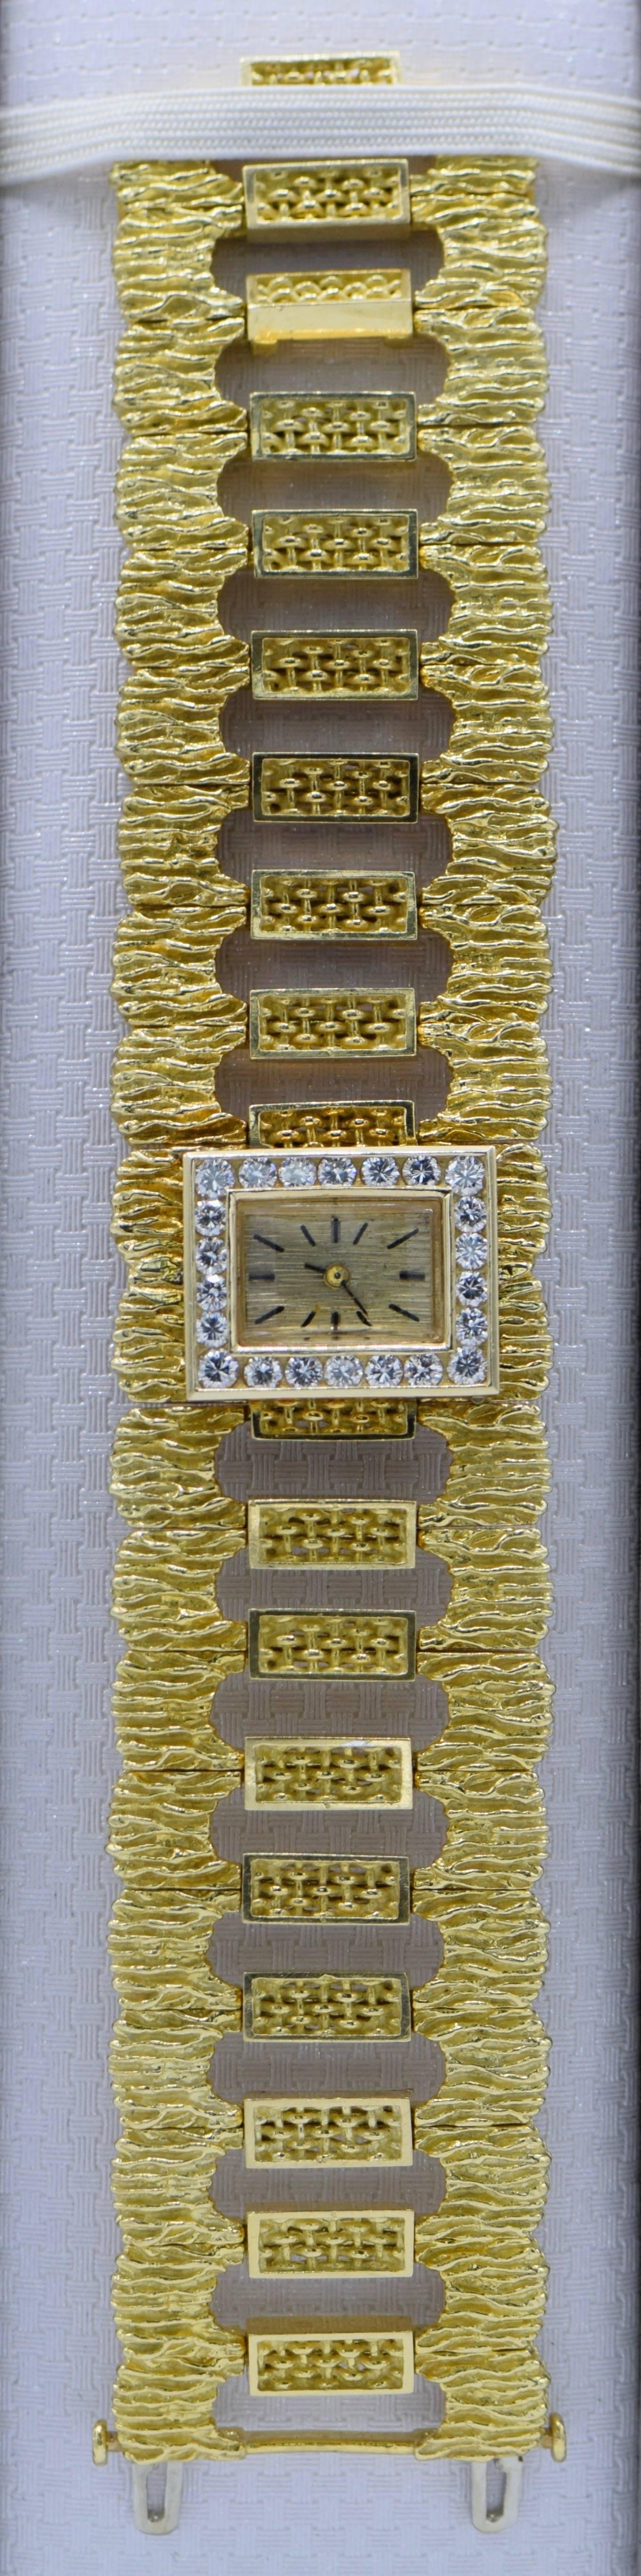 18 Karat Gold and Diamond Link Wrist Watch

Diamond weight: 1.10 Carat 

White color- D-E

Clean Clarity: VS

Working condition 

Comes with extra link 